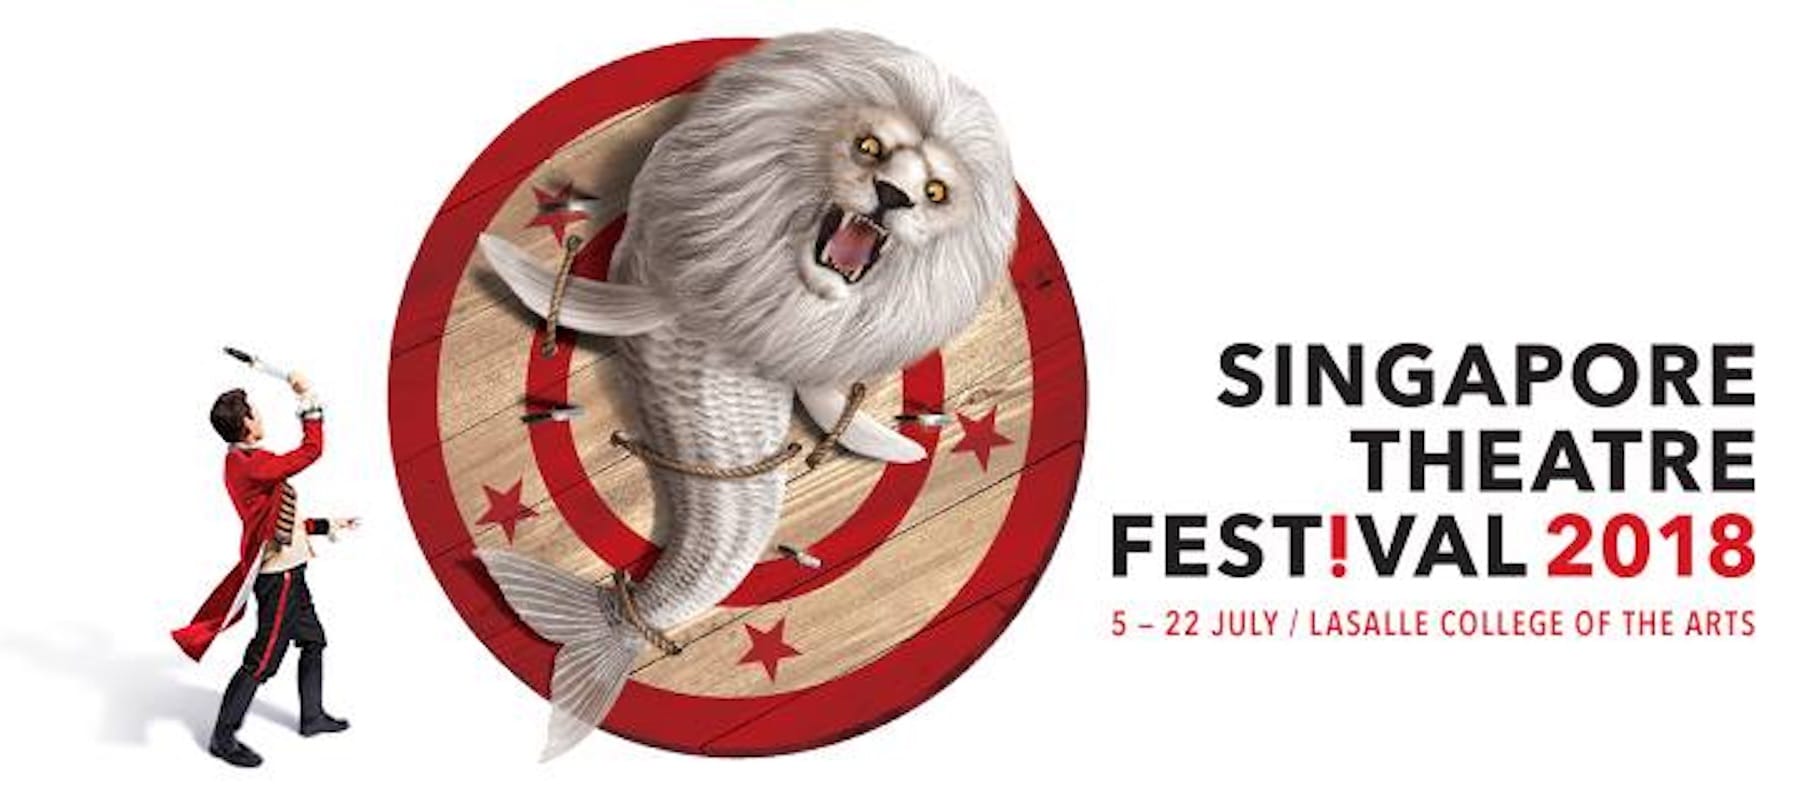 Things To Do This Weekend In Singapore (6th - 8th July) 7